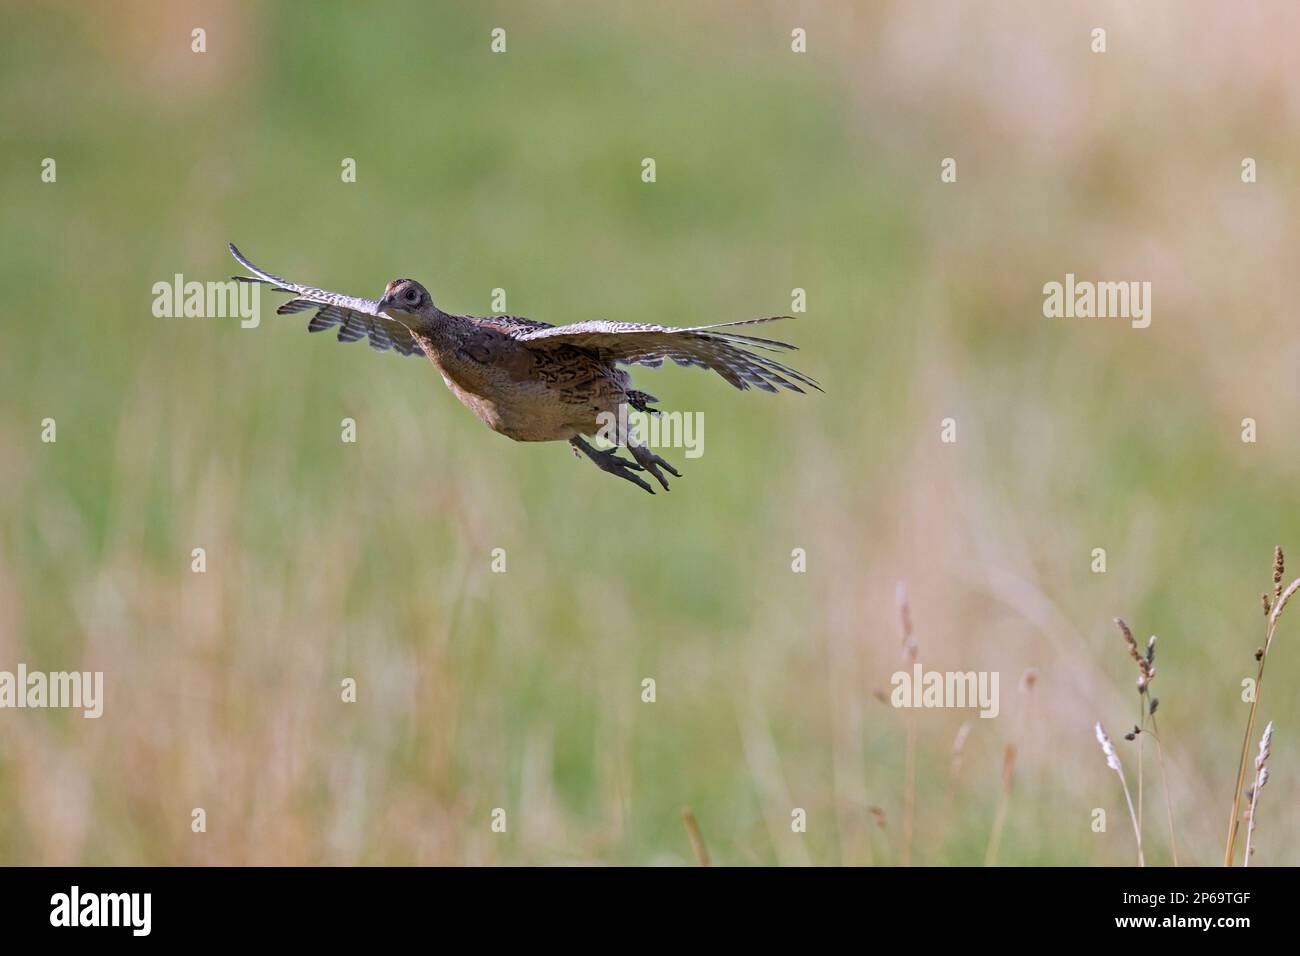 Common pheasant / ring-necked pheasant (Phasianus colchicus) female / hen flying over field in summer Stock Photo